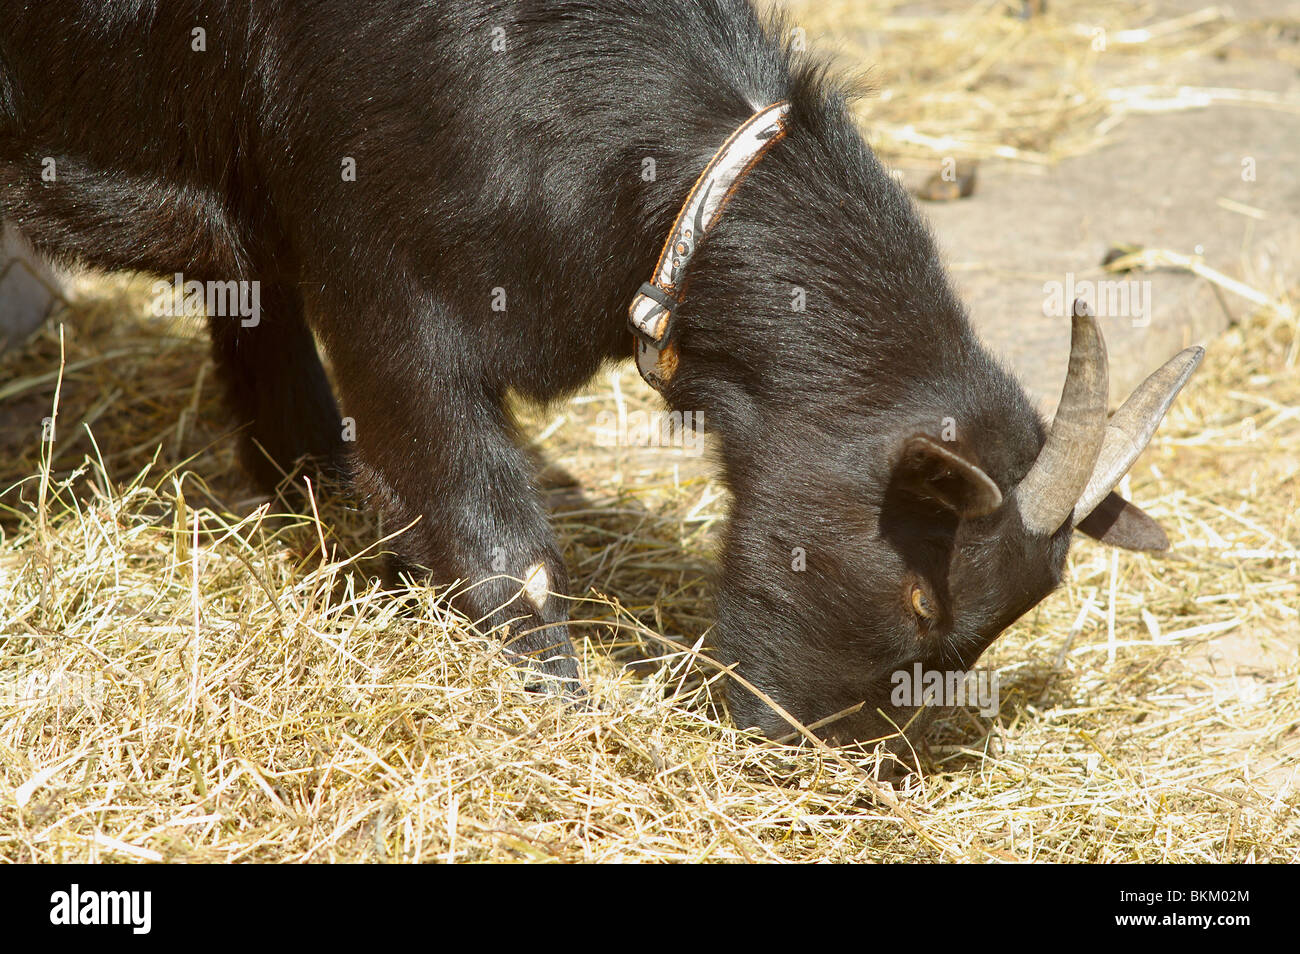 Black domestic goat eating hay on courtyard Stock Photo